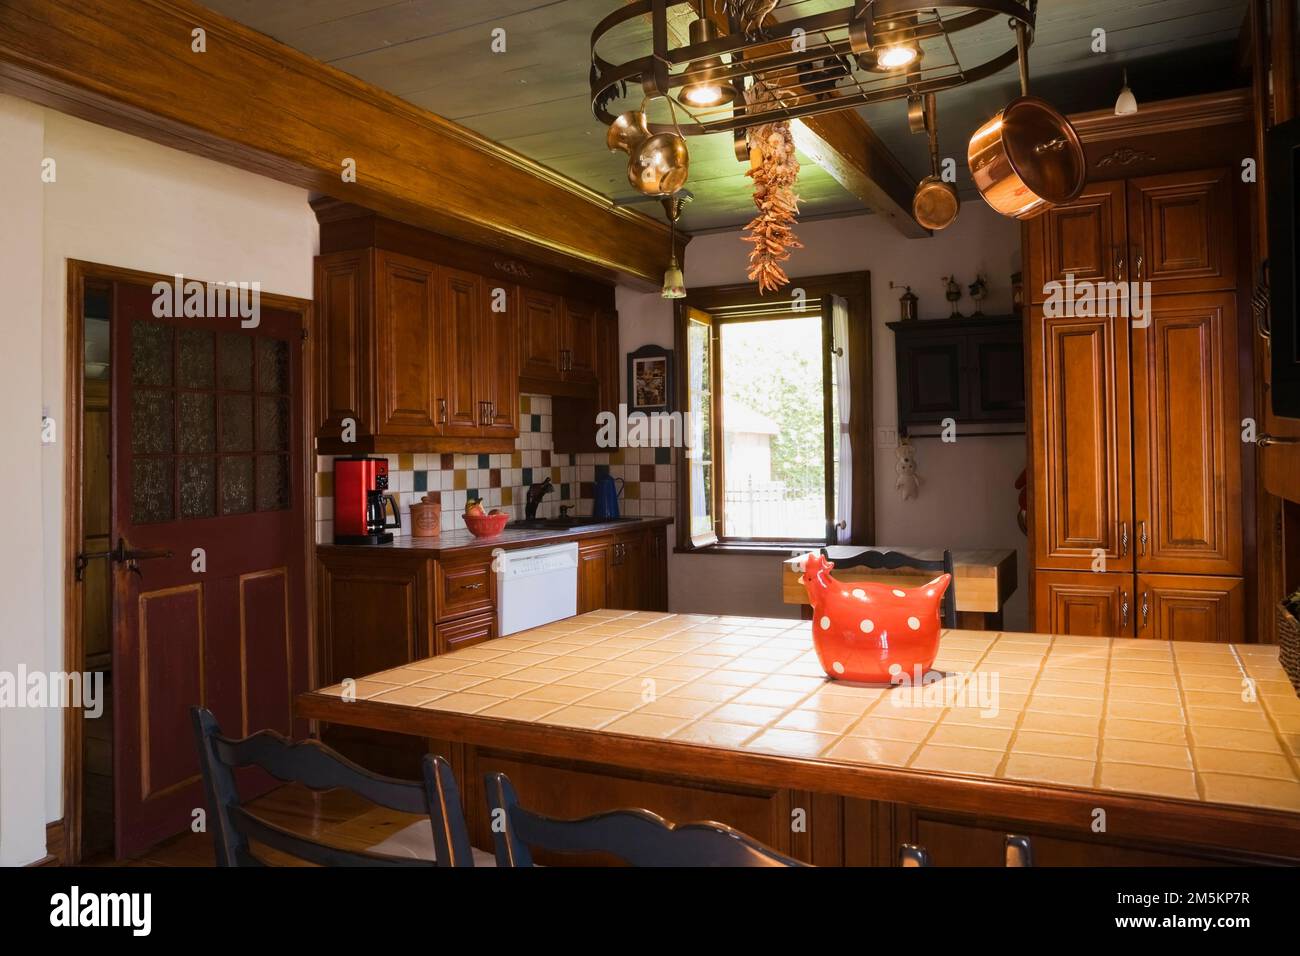 Tan ceramic top island with two old wooden bistro style weaved seat with cushions chairs in kitchen inside reconstructed 1840s log home. Stock Photo